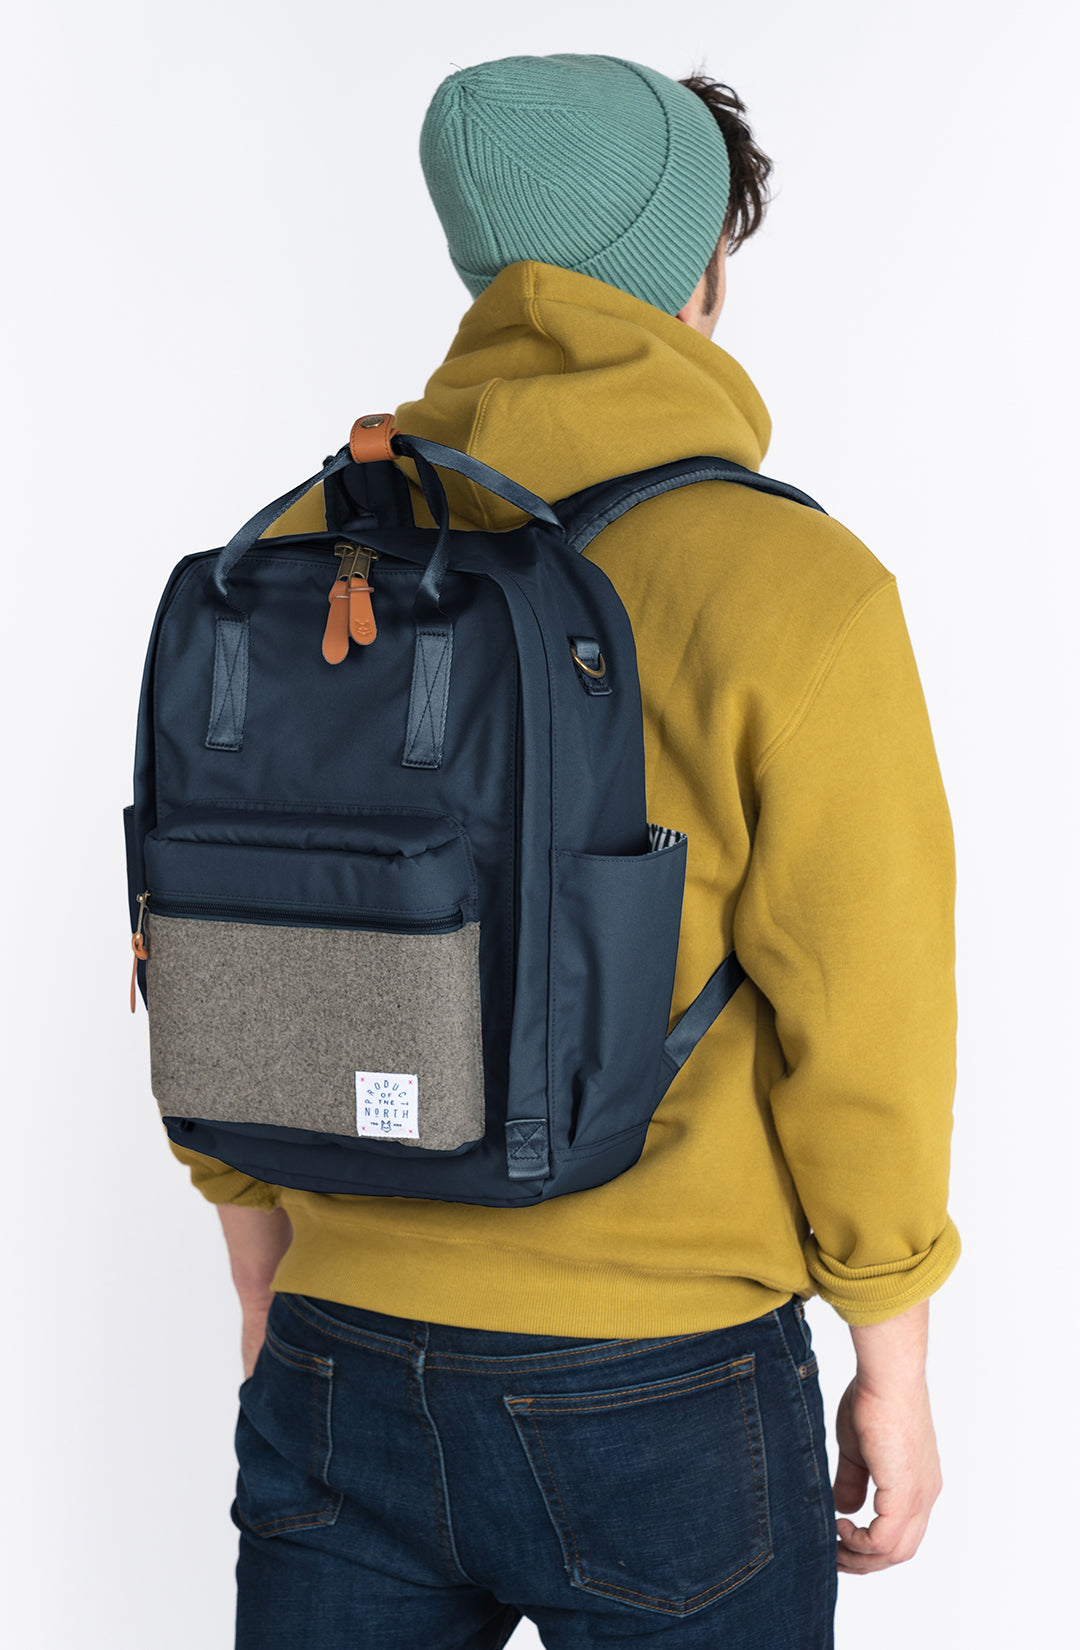 Elkin Diaper Bag Backpack - Navy Blue [Sustainable] // POTN – Product ...